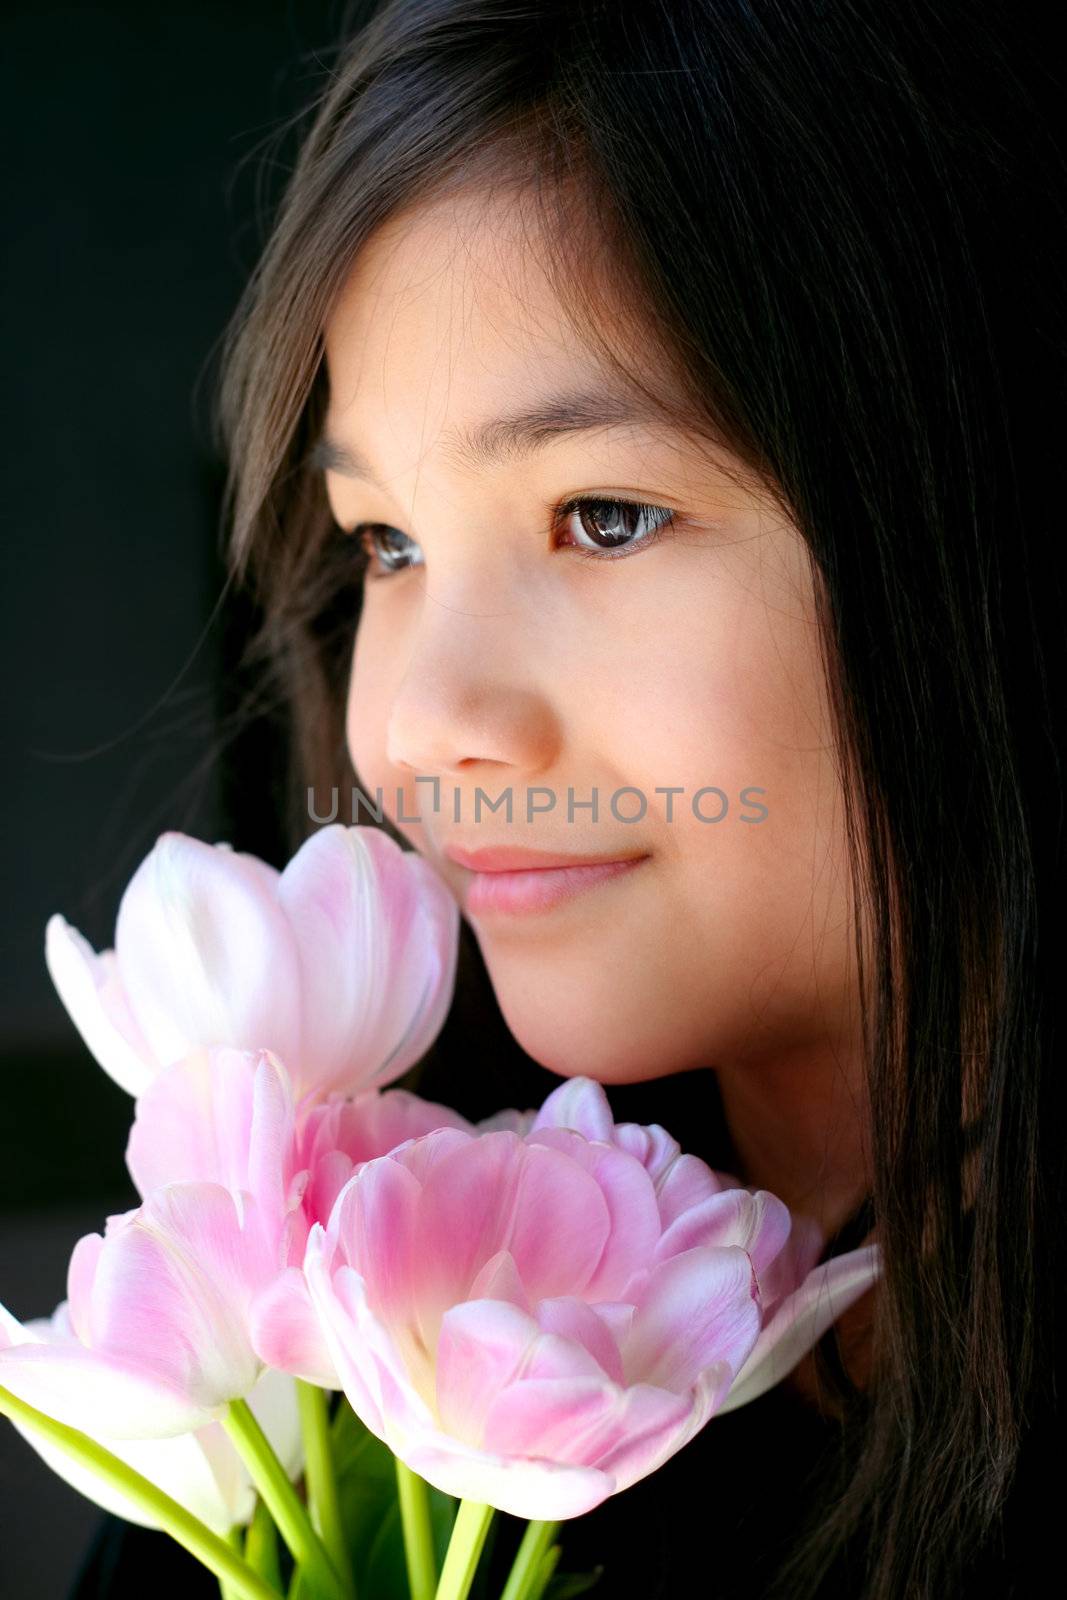 Beautiful little girl with pink tulips by face by jarenwicklund